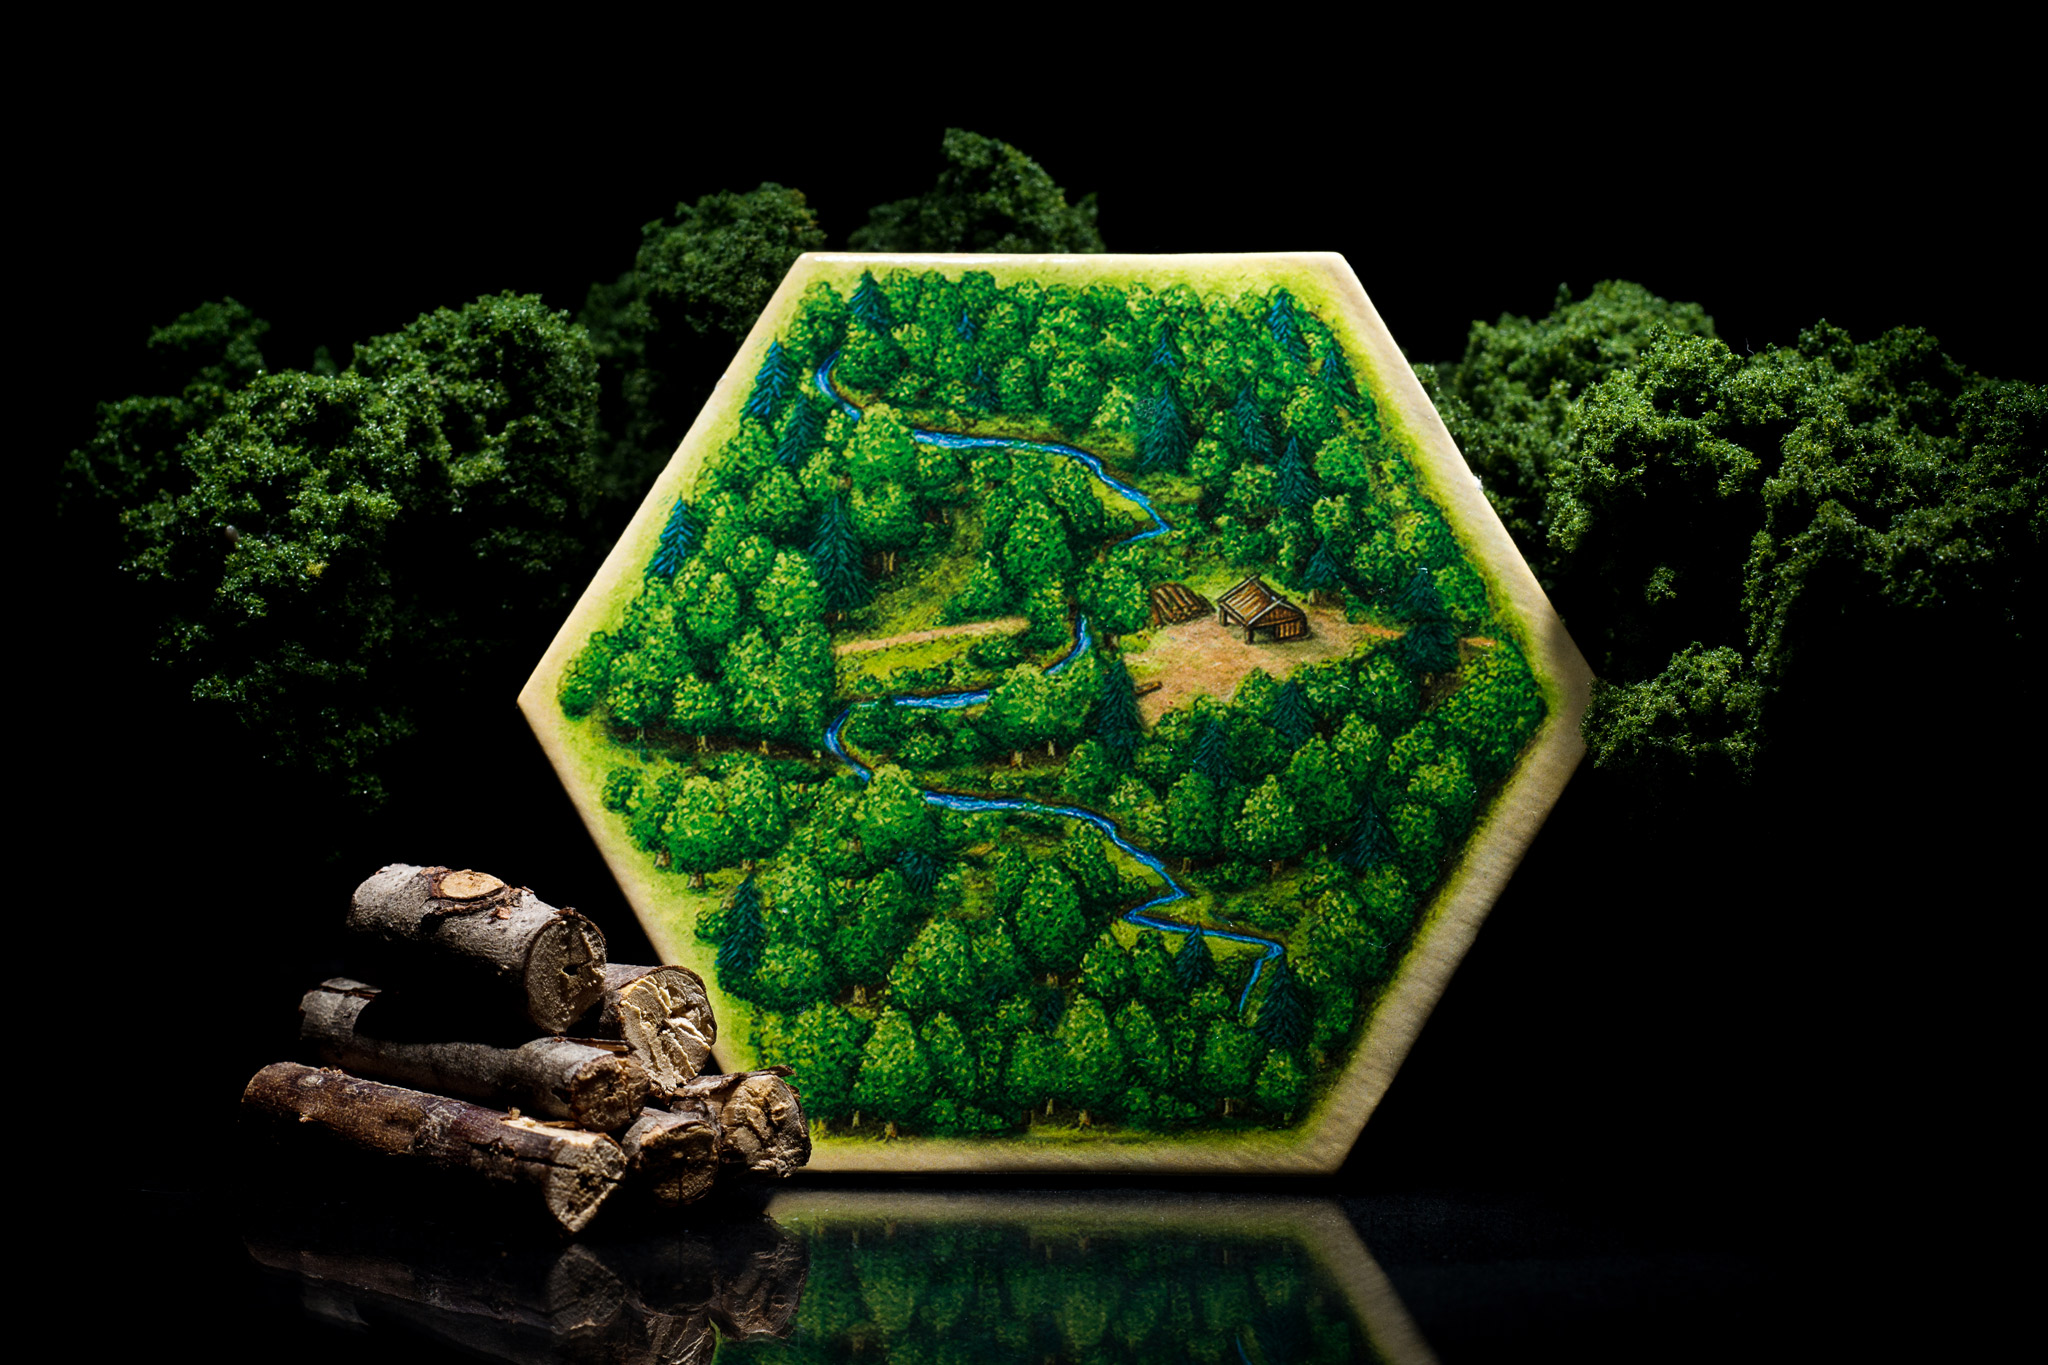 Forest hex tile from Catan